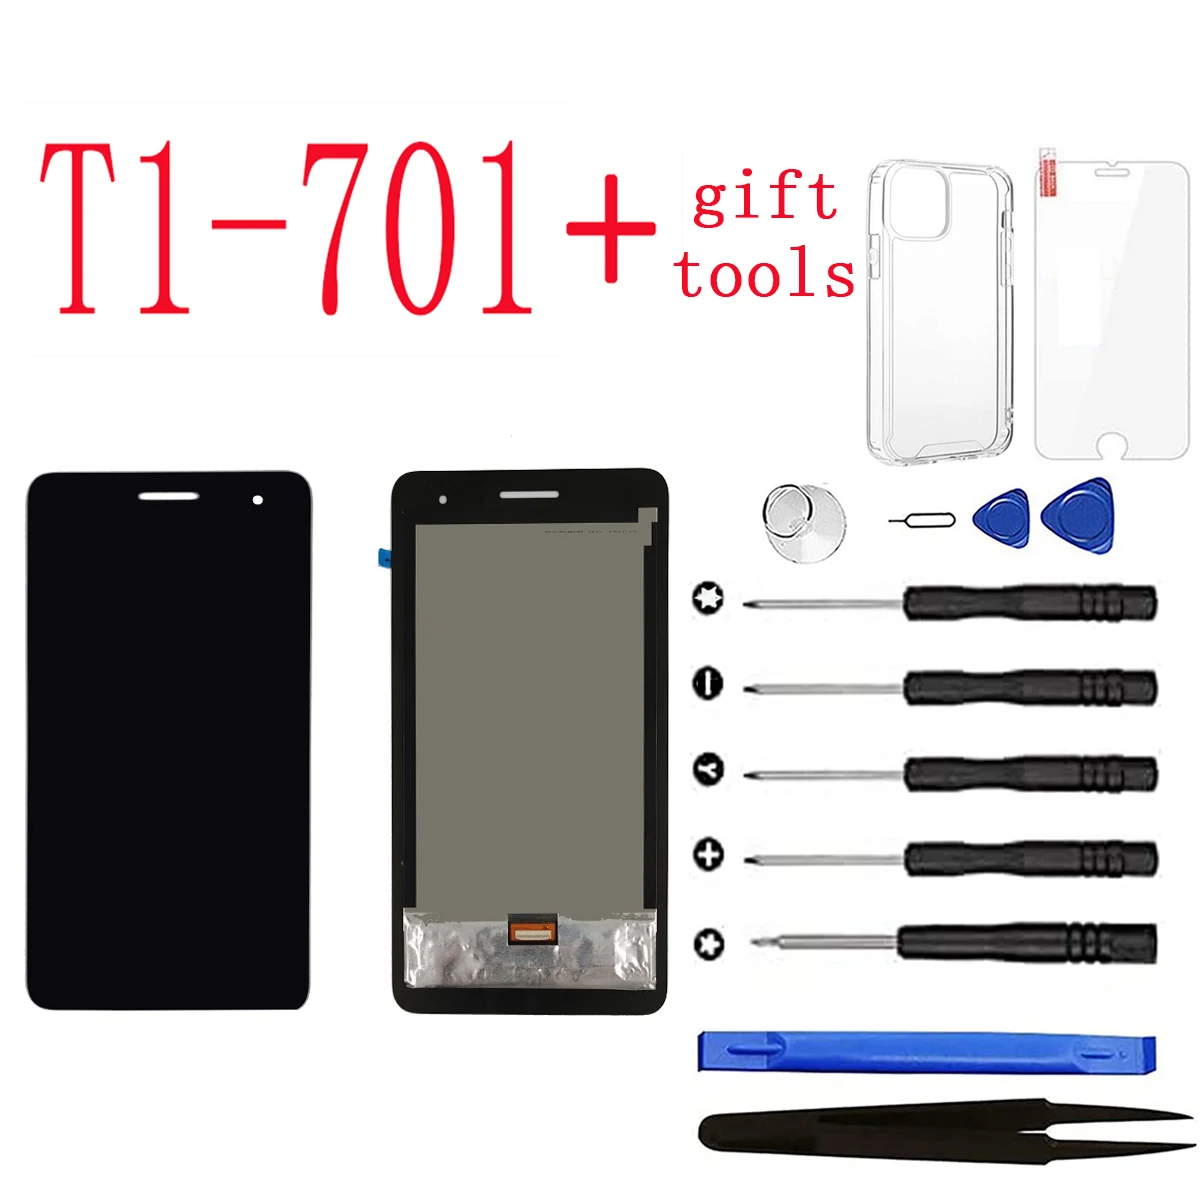 

JQYDZH For HUAWEI MediaPad T1 7.0 701 701U 701UA T1-701 T1-701U LCD Display and with Touch Screen Digitizer Assembly+gift+tools